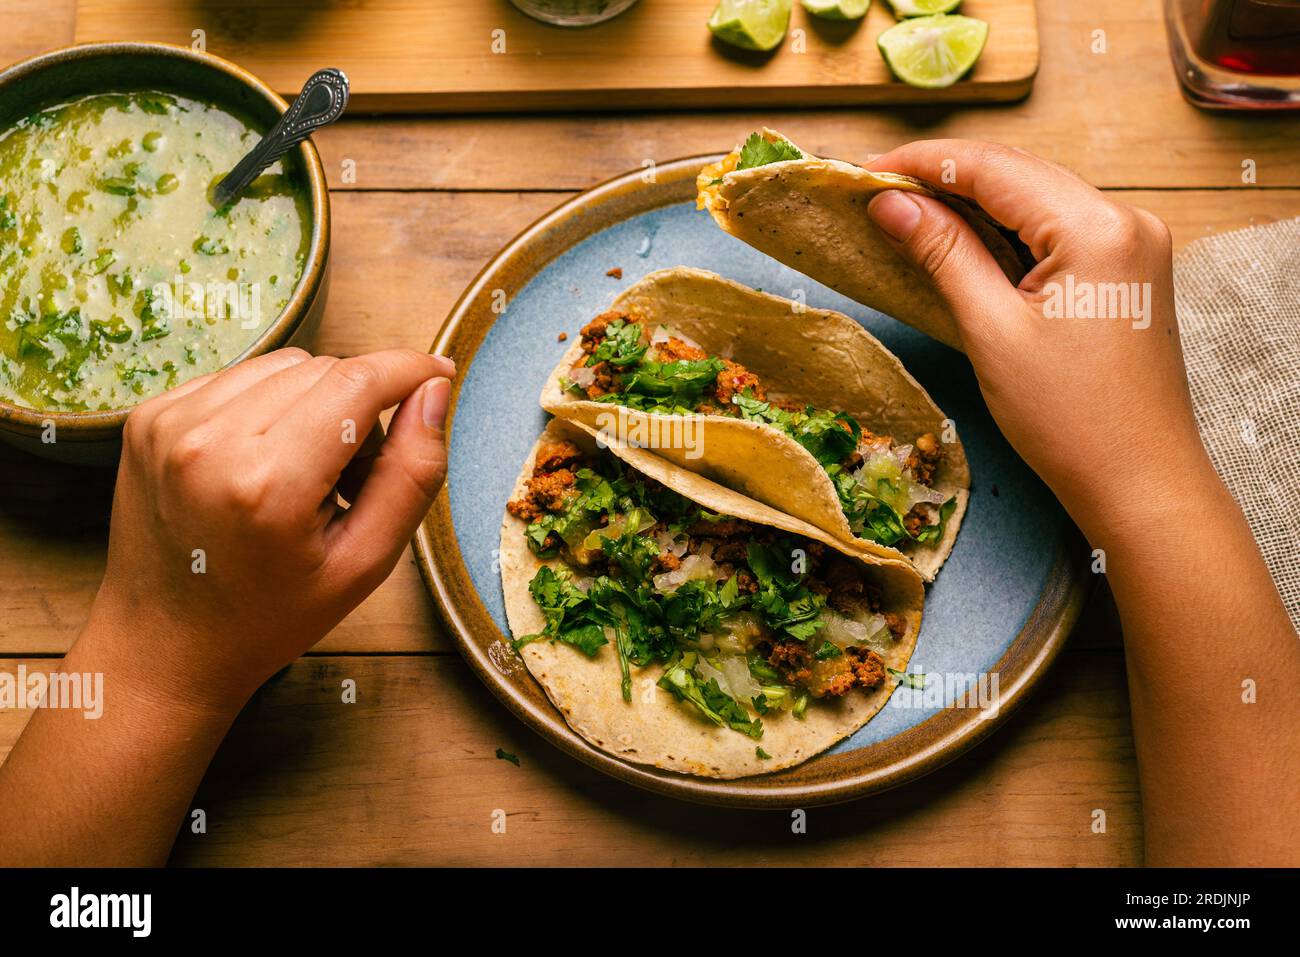 Woman's hand holding a taco of marinated meat. Plate with tacos, sauce and vegetables on wooden table. Top view. Stock Photo